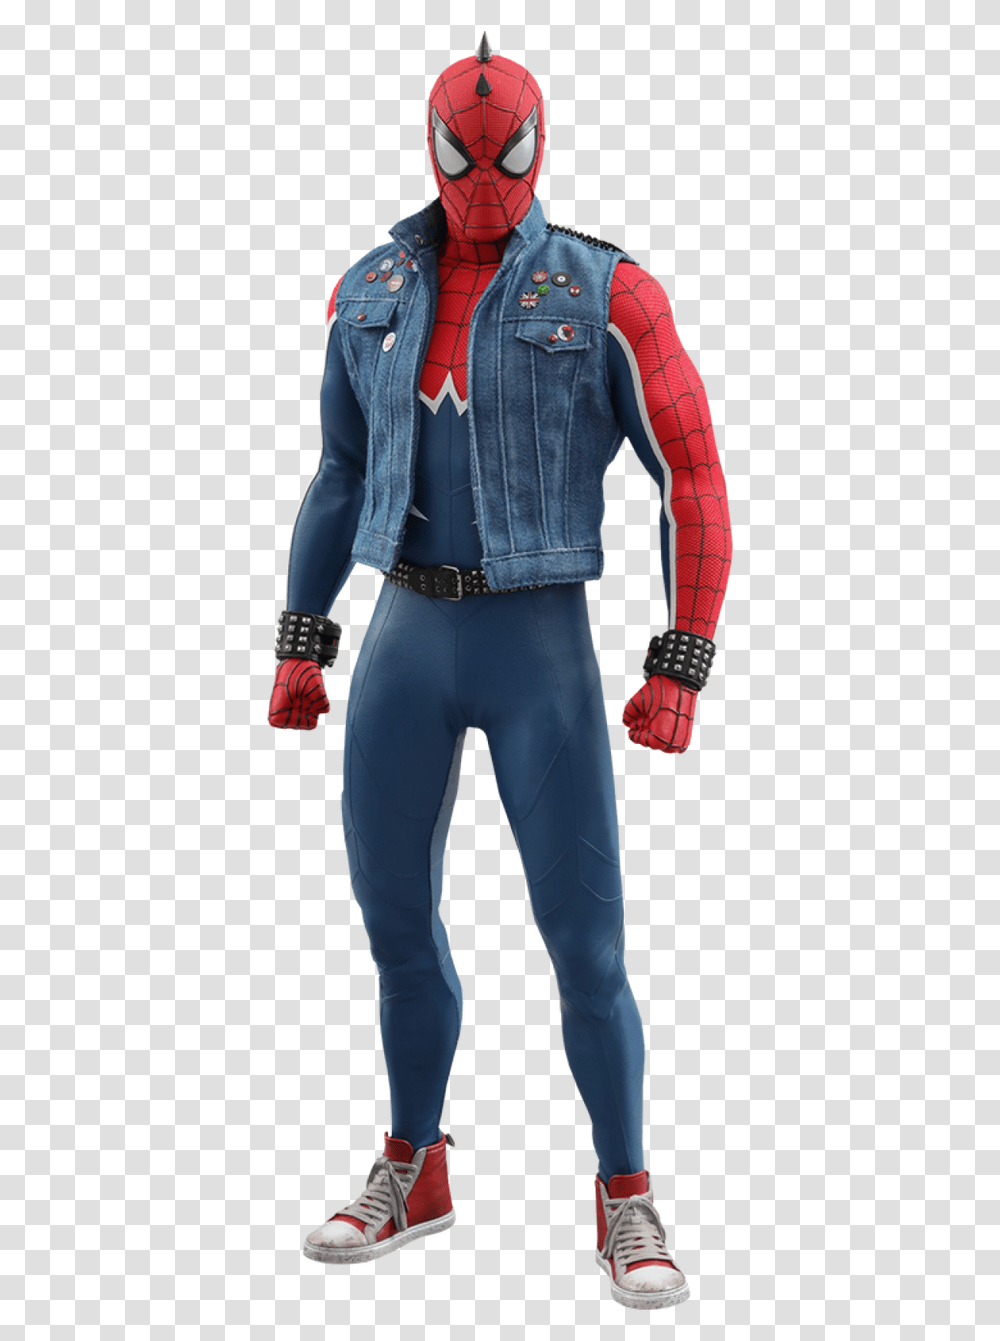 Spider Man Spiderpunk Suit Ps4 Video Game Hot Toys 16vgm32 Punk Man Ps4, Clothing, Pants, Person, People Transparent Png